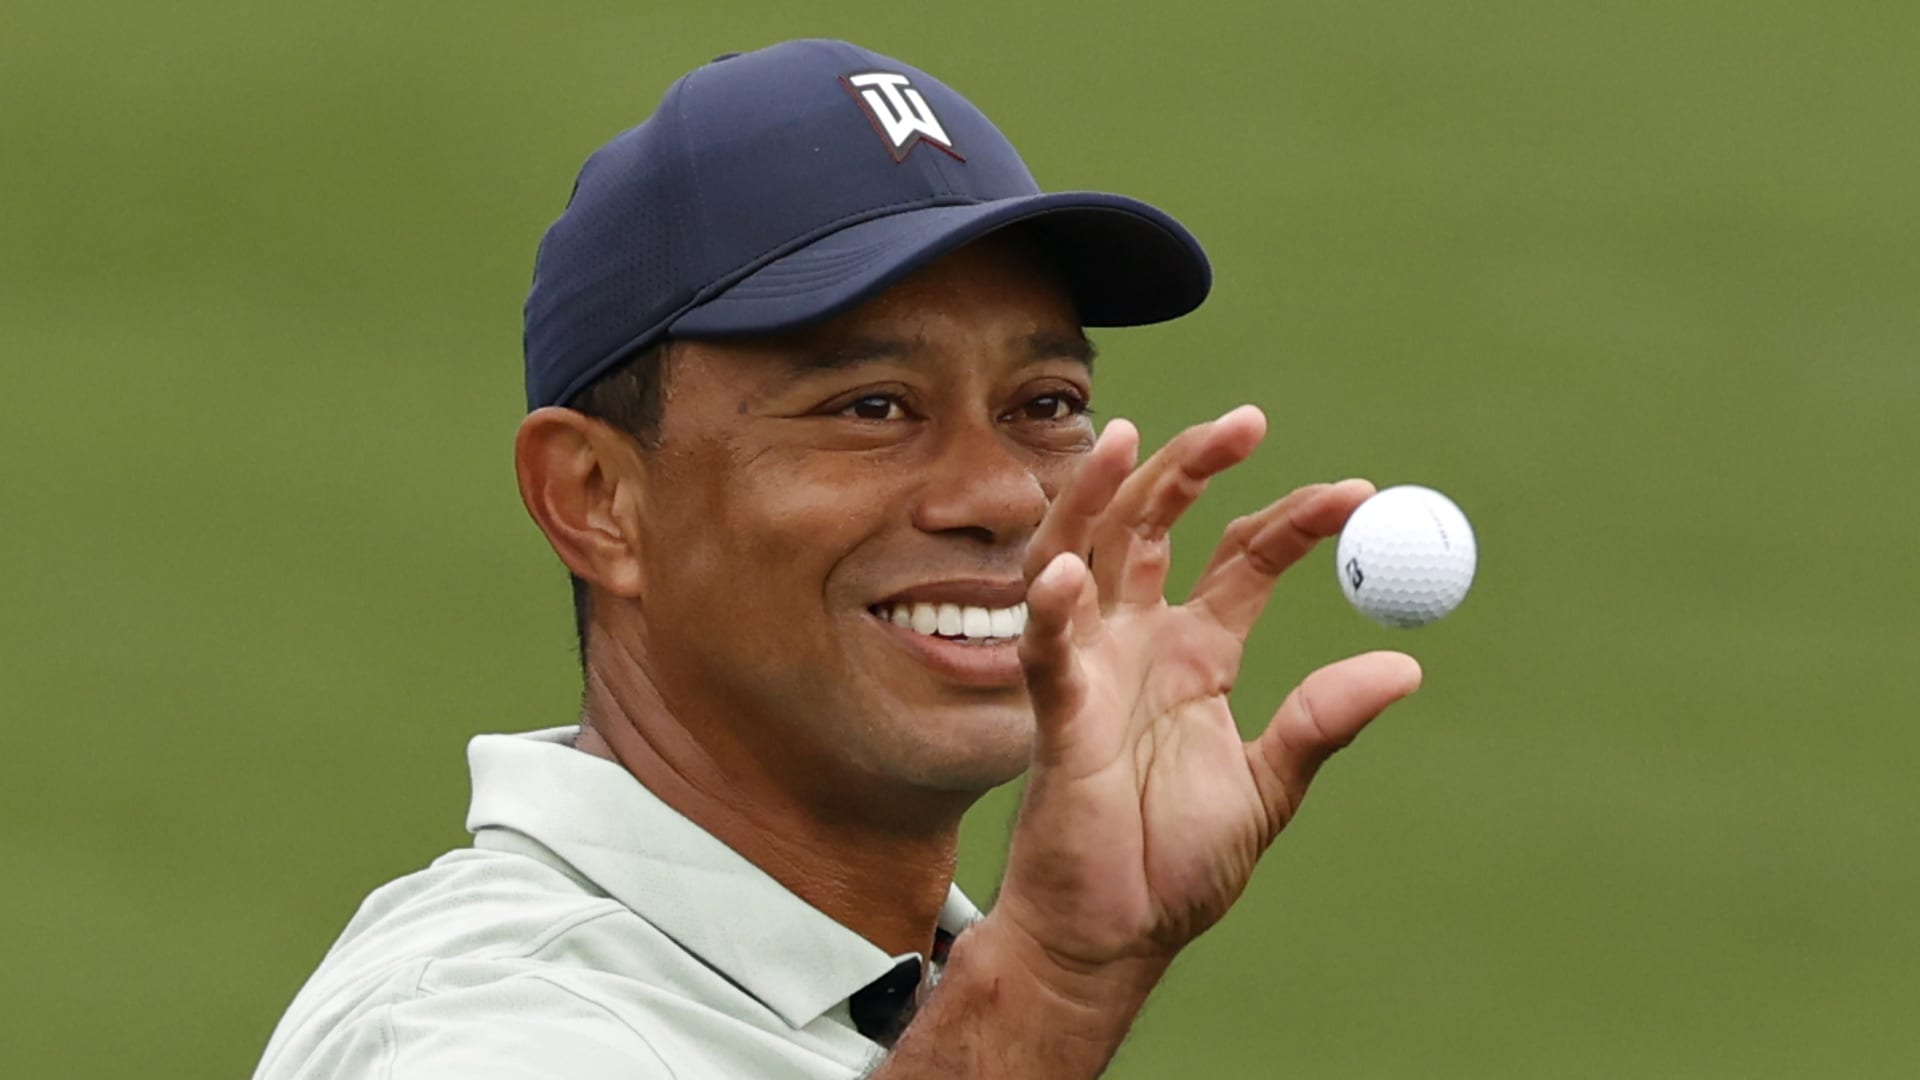 Tiger Woods signs apparel and footwear deal with TaylorMade following his split with Nike